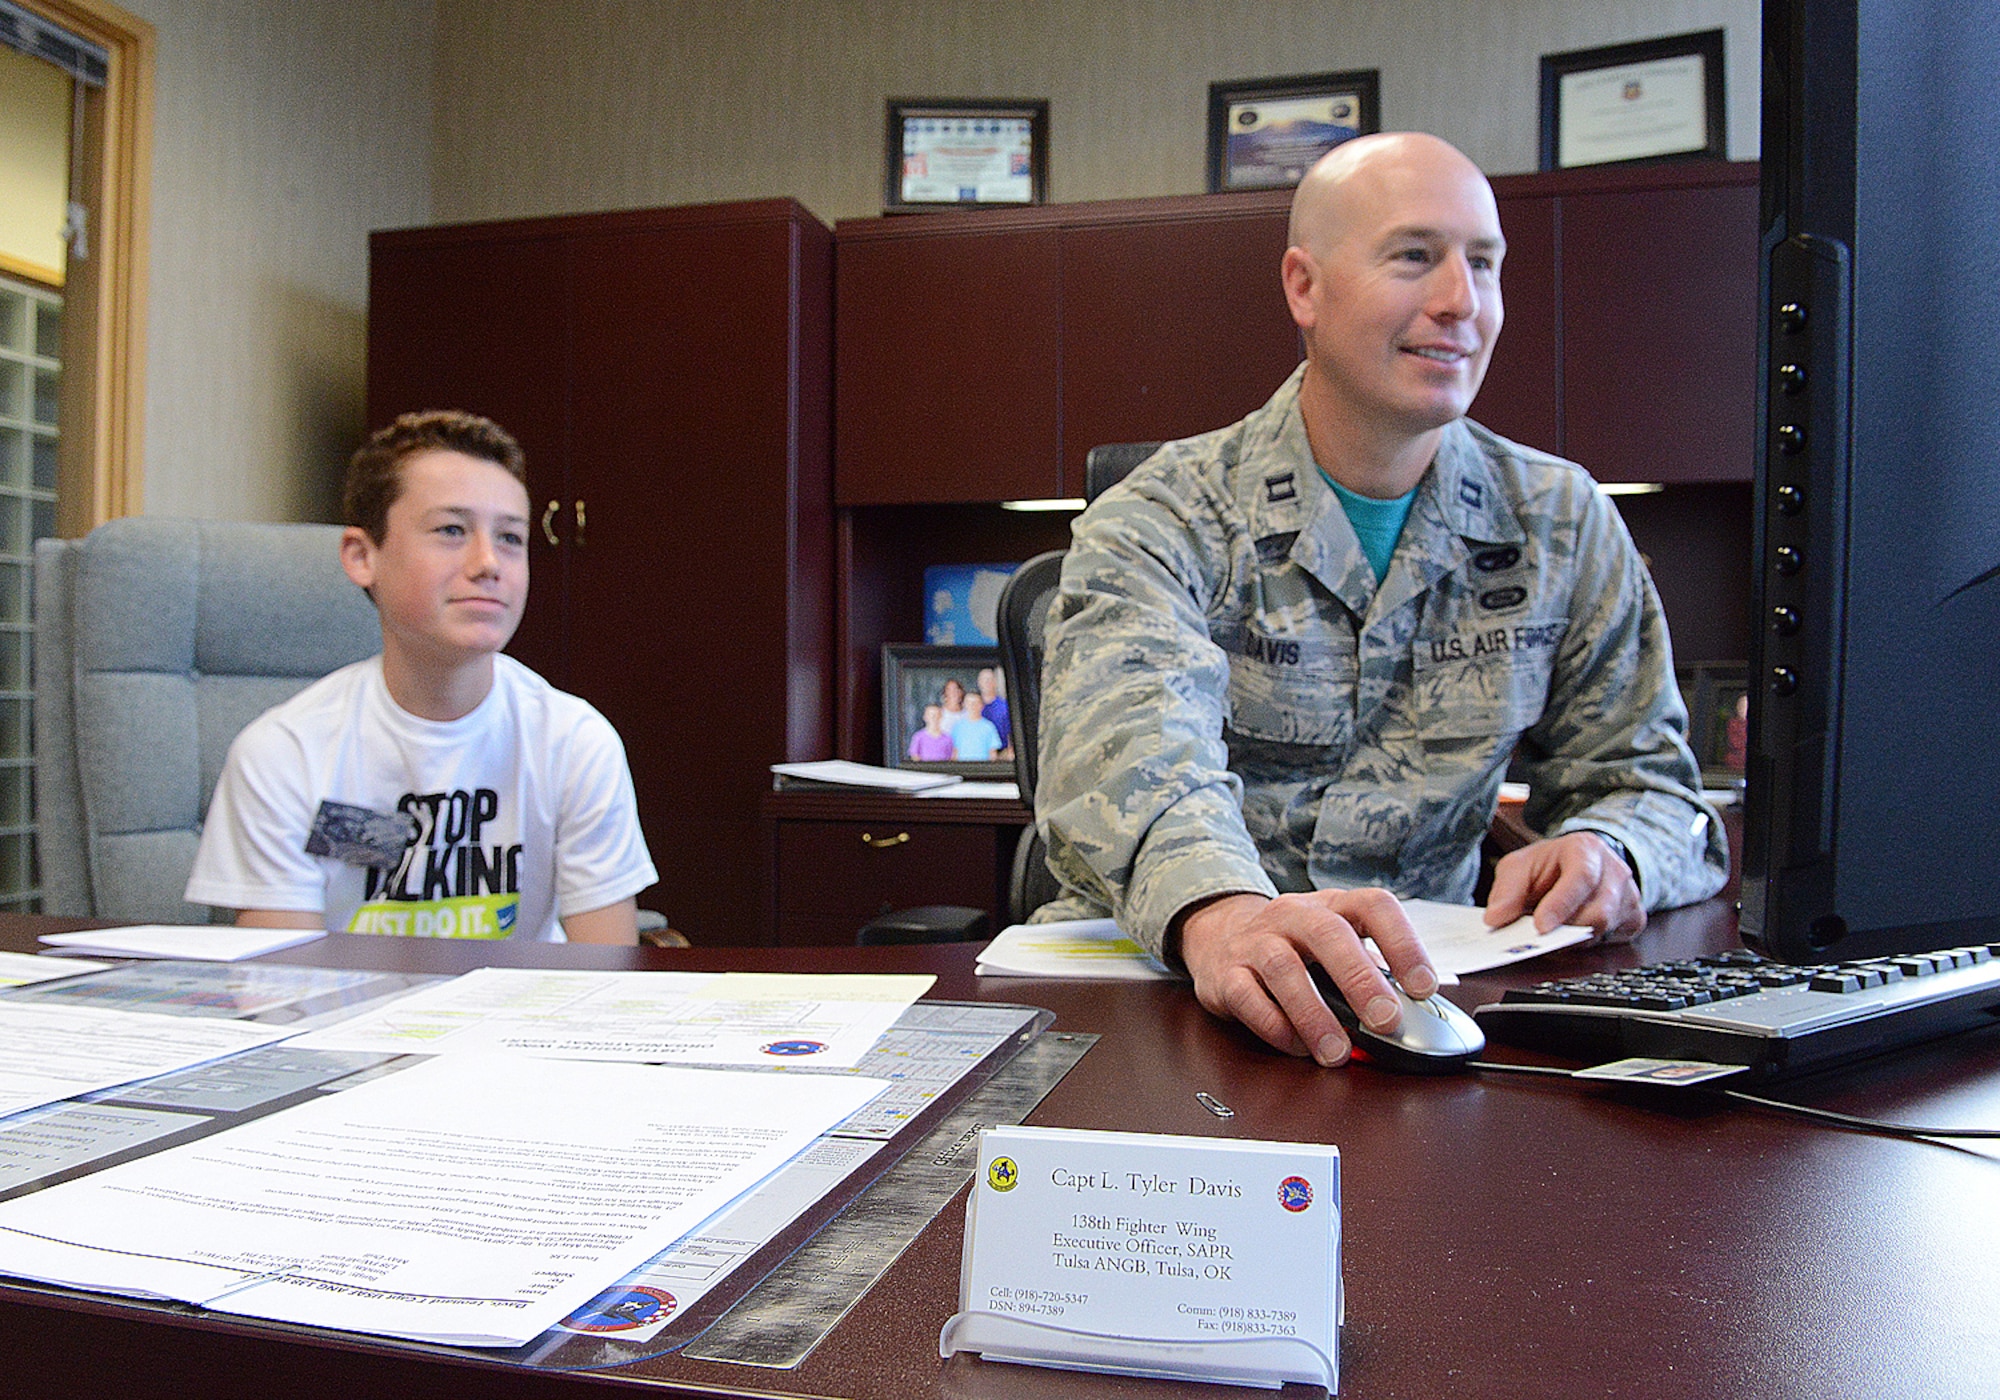 Kade Davis, son of Capt. Tyler Davis, 138th Fighter Wing Executive Officer, watches over his dad's shoulder as he works at the Tulsa Air National Guard Base, Okla., 23 April, 2015, during "National Take Our Daughters and Sons to Work Day.”   The 138th participated in the event as a way to give children an insight into what their parents do, as well as demonstrating to them what is involved day to day in a job or career.  (U.S. National Guard photo by Senior Master Sgt.  Preston L. Chasteen/Released)